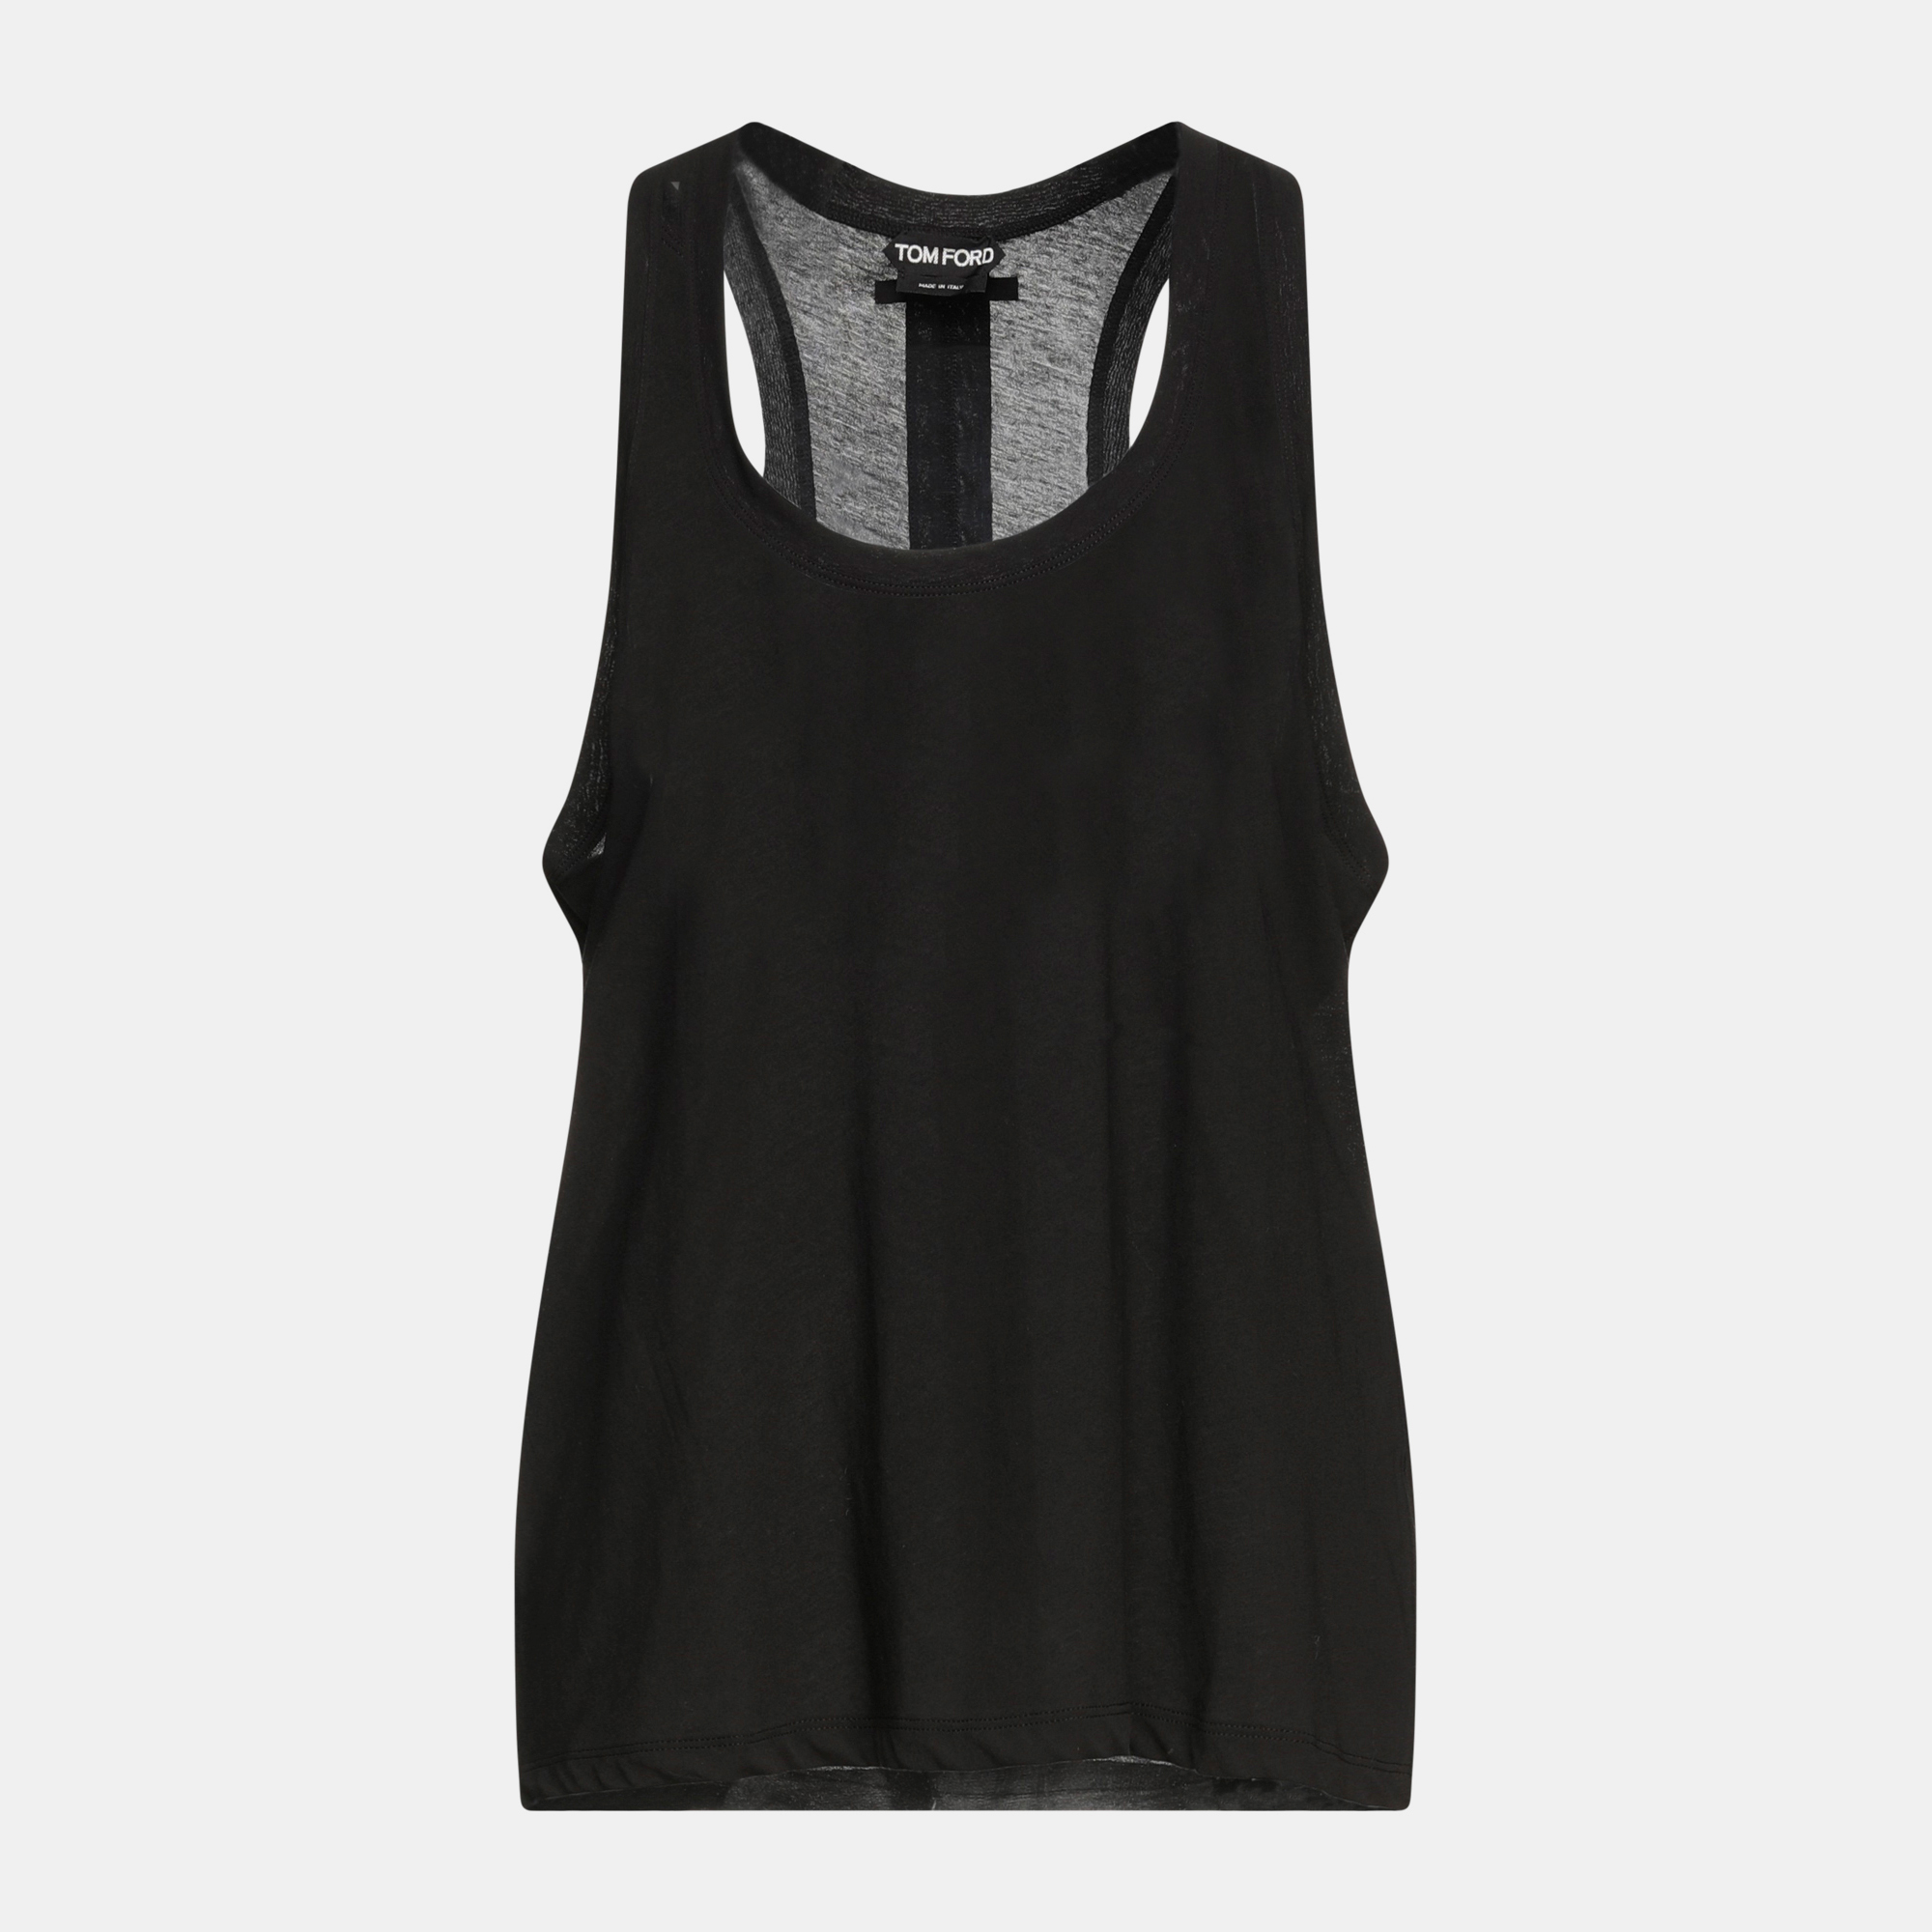 Tom ford cotton tank tops 46